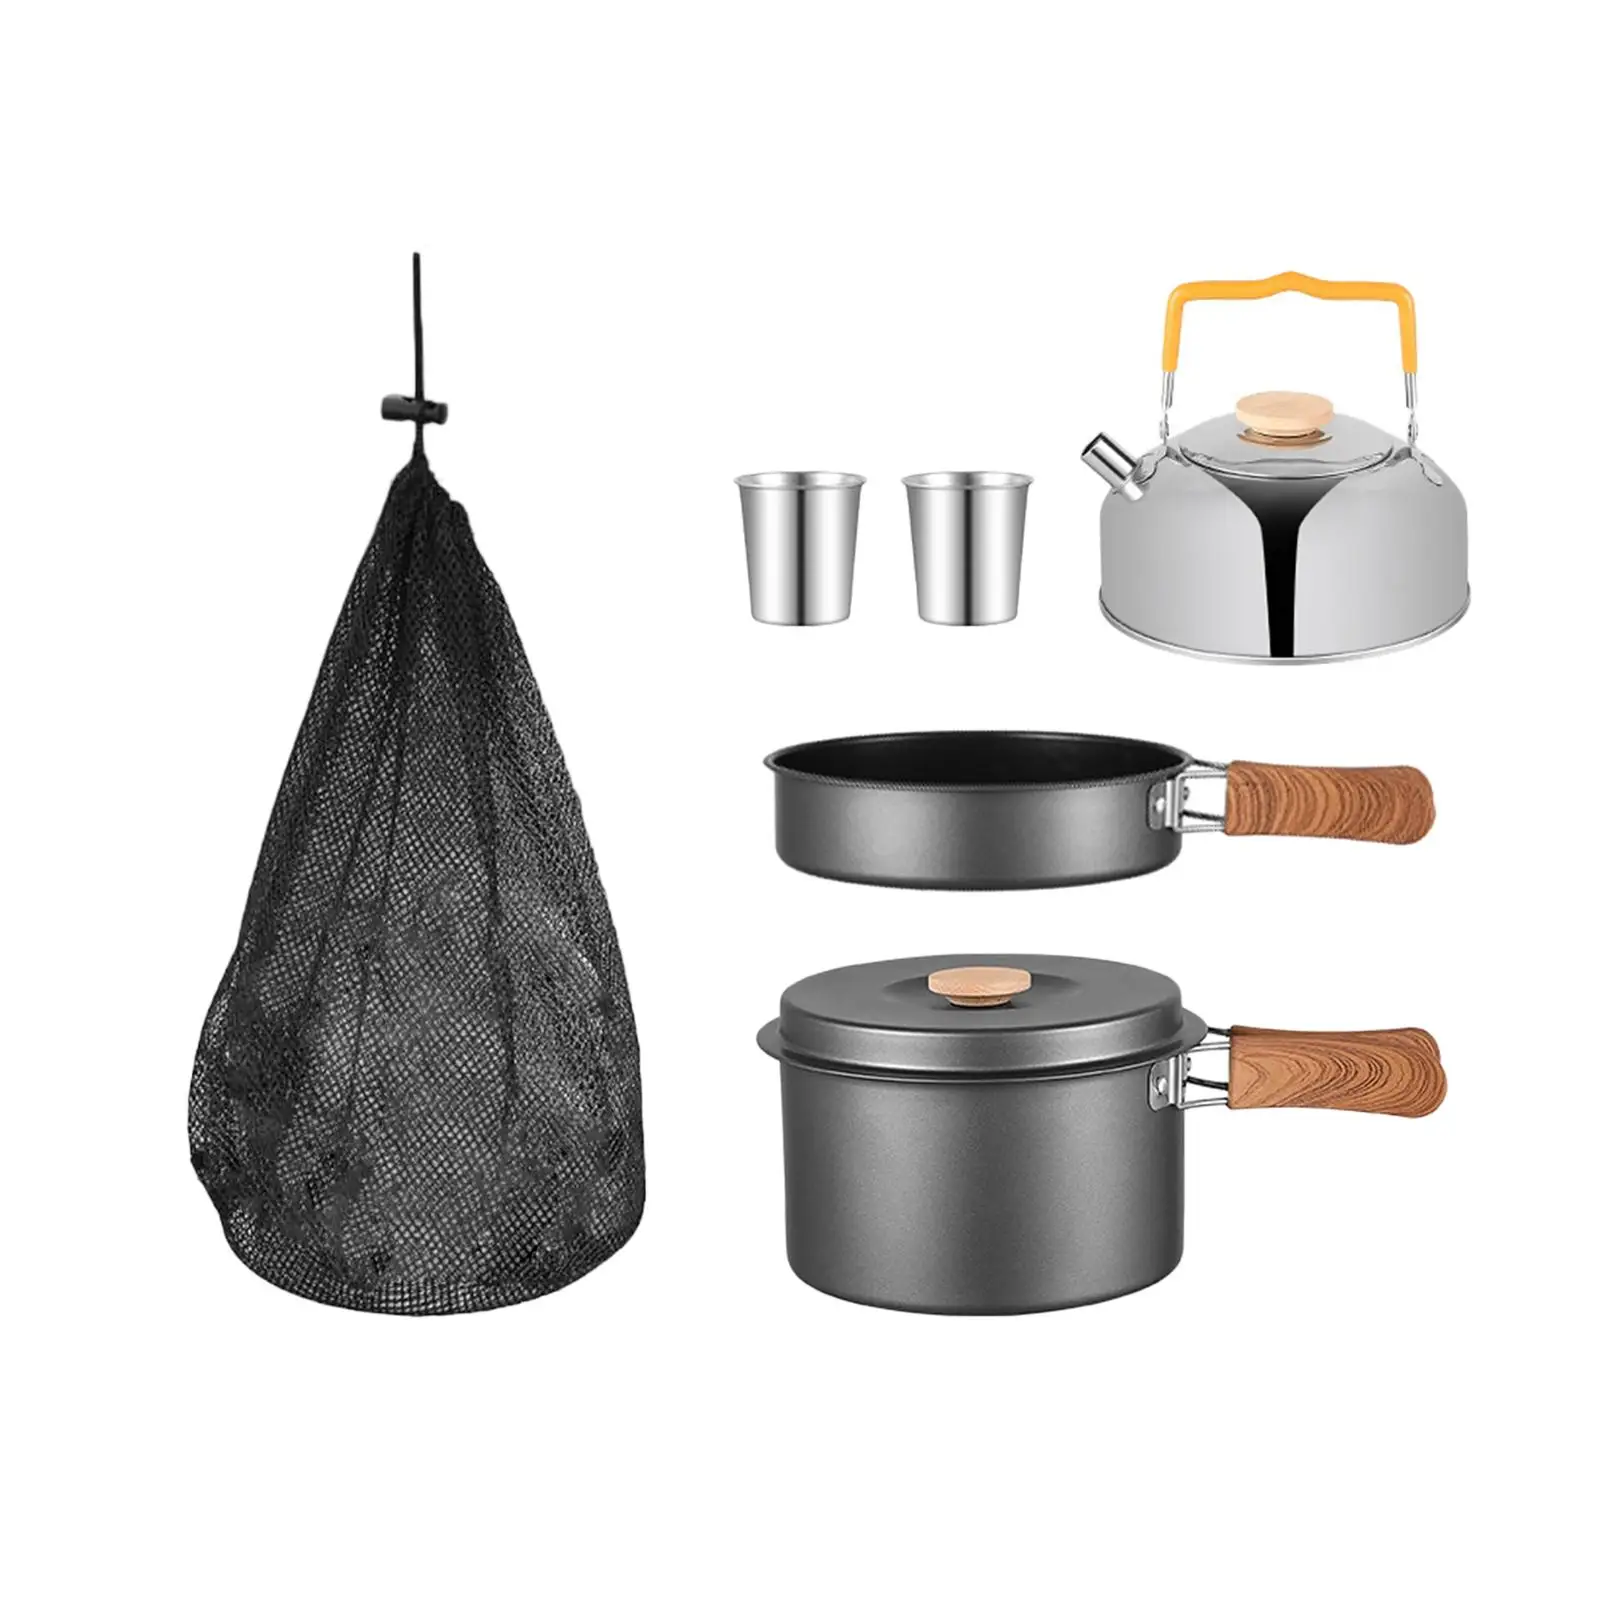 5Pcs Camping Cookware Set Camping Pot Pan and Kettle with Storage Bag Outdoor Cook Gear for Hiking Travel Equipment Supplies 